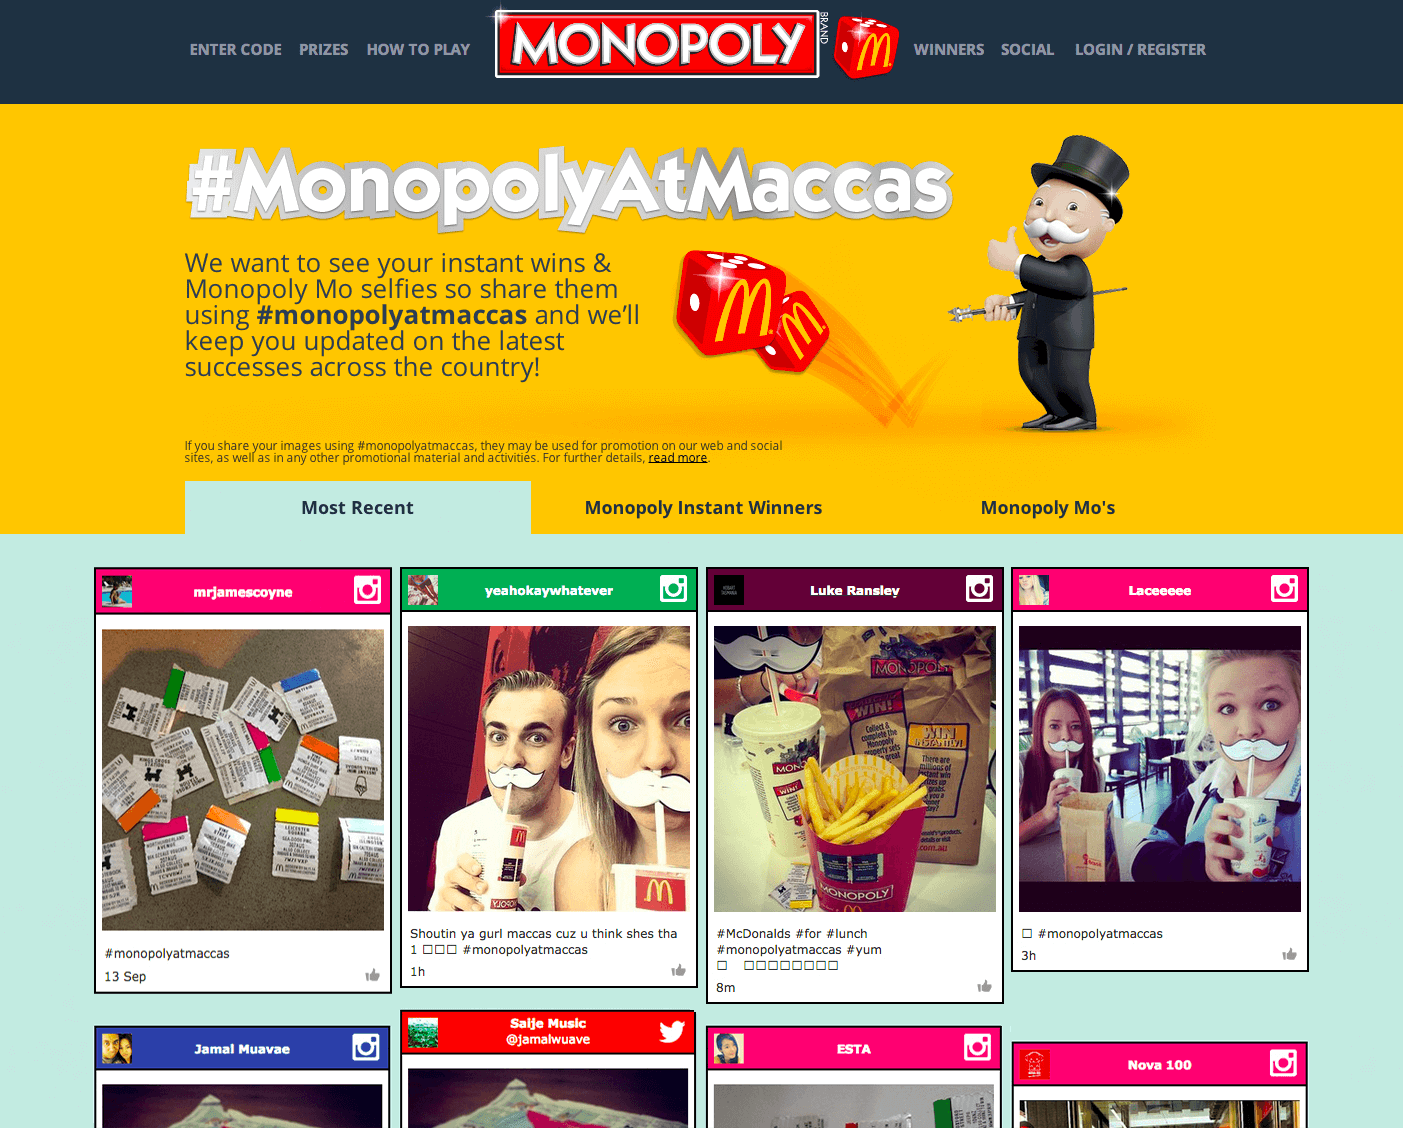 Monopolyatmaccas: User Generated Content success